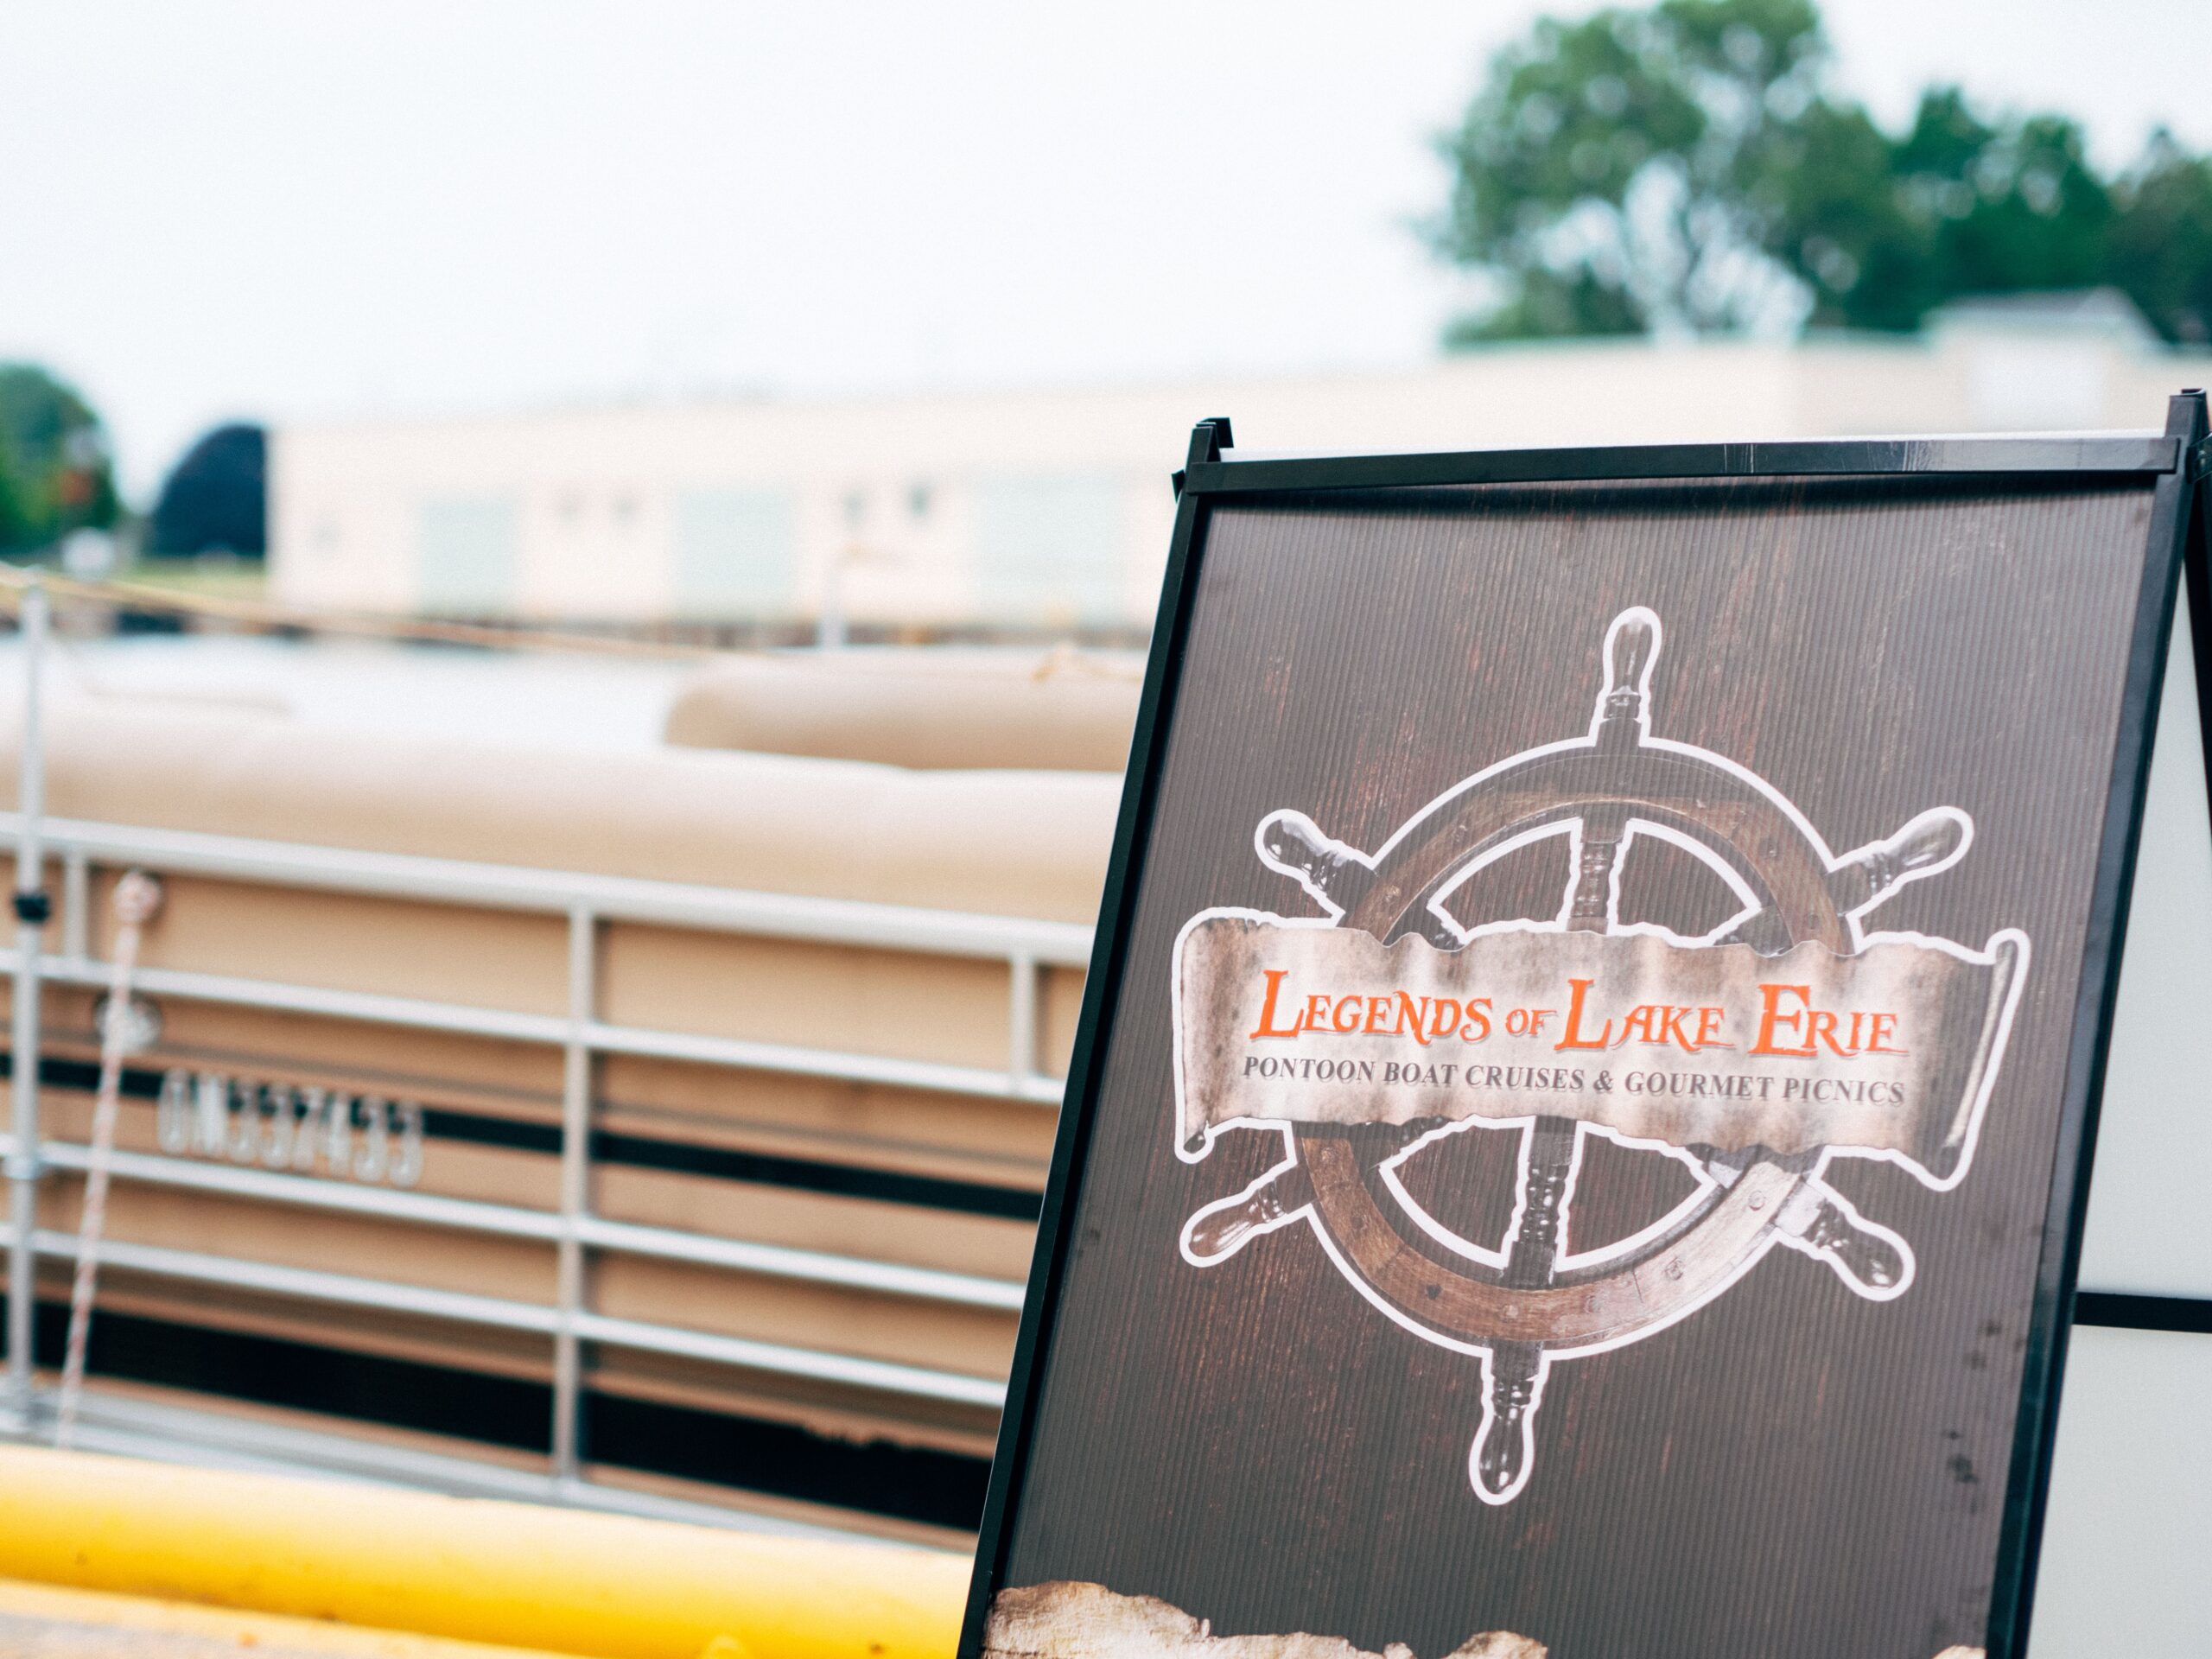 Cast away on this 2 Hour Pontoon Boat Cruise & Gourmet Picnic Experience